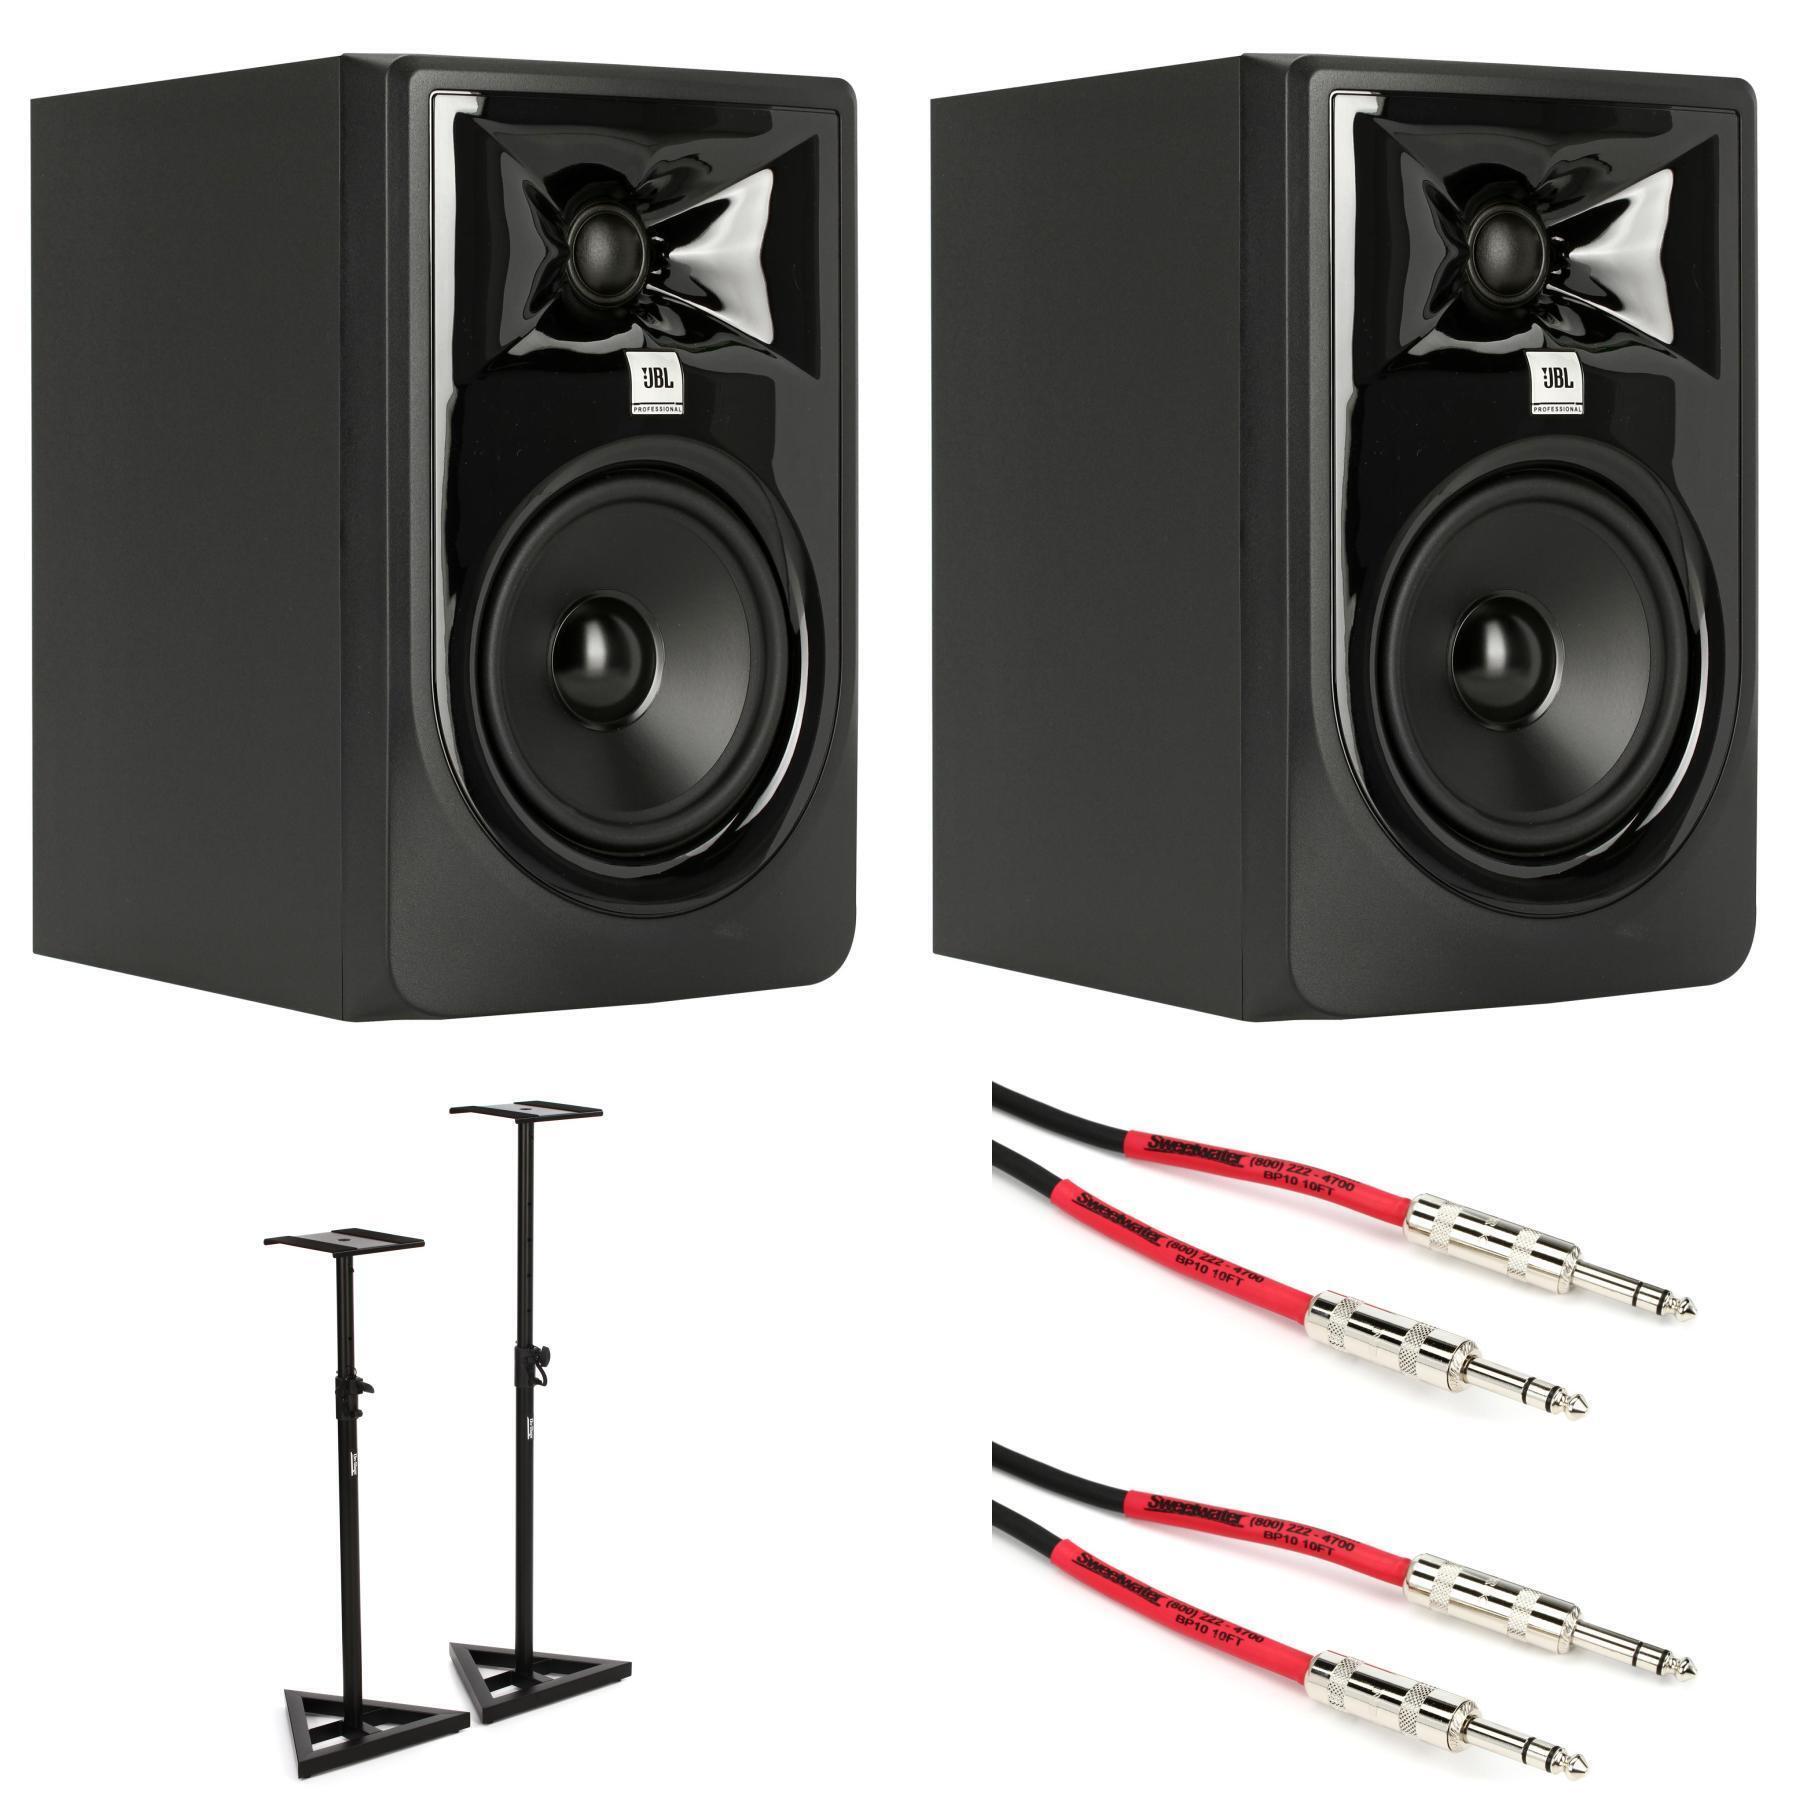 JBL 305P MkII 5-inch Powered Studio Monitor Pair with Stands and Cables